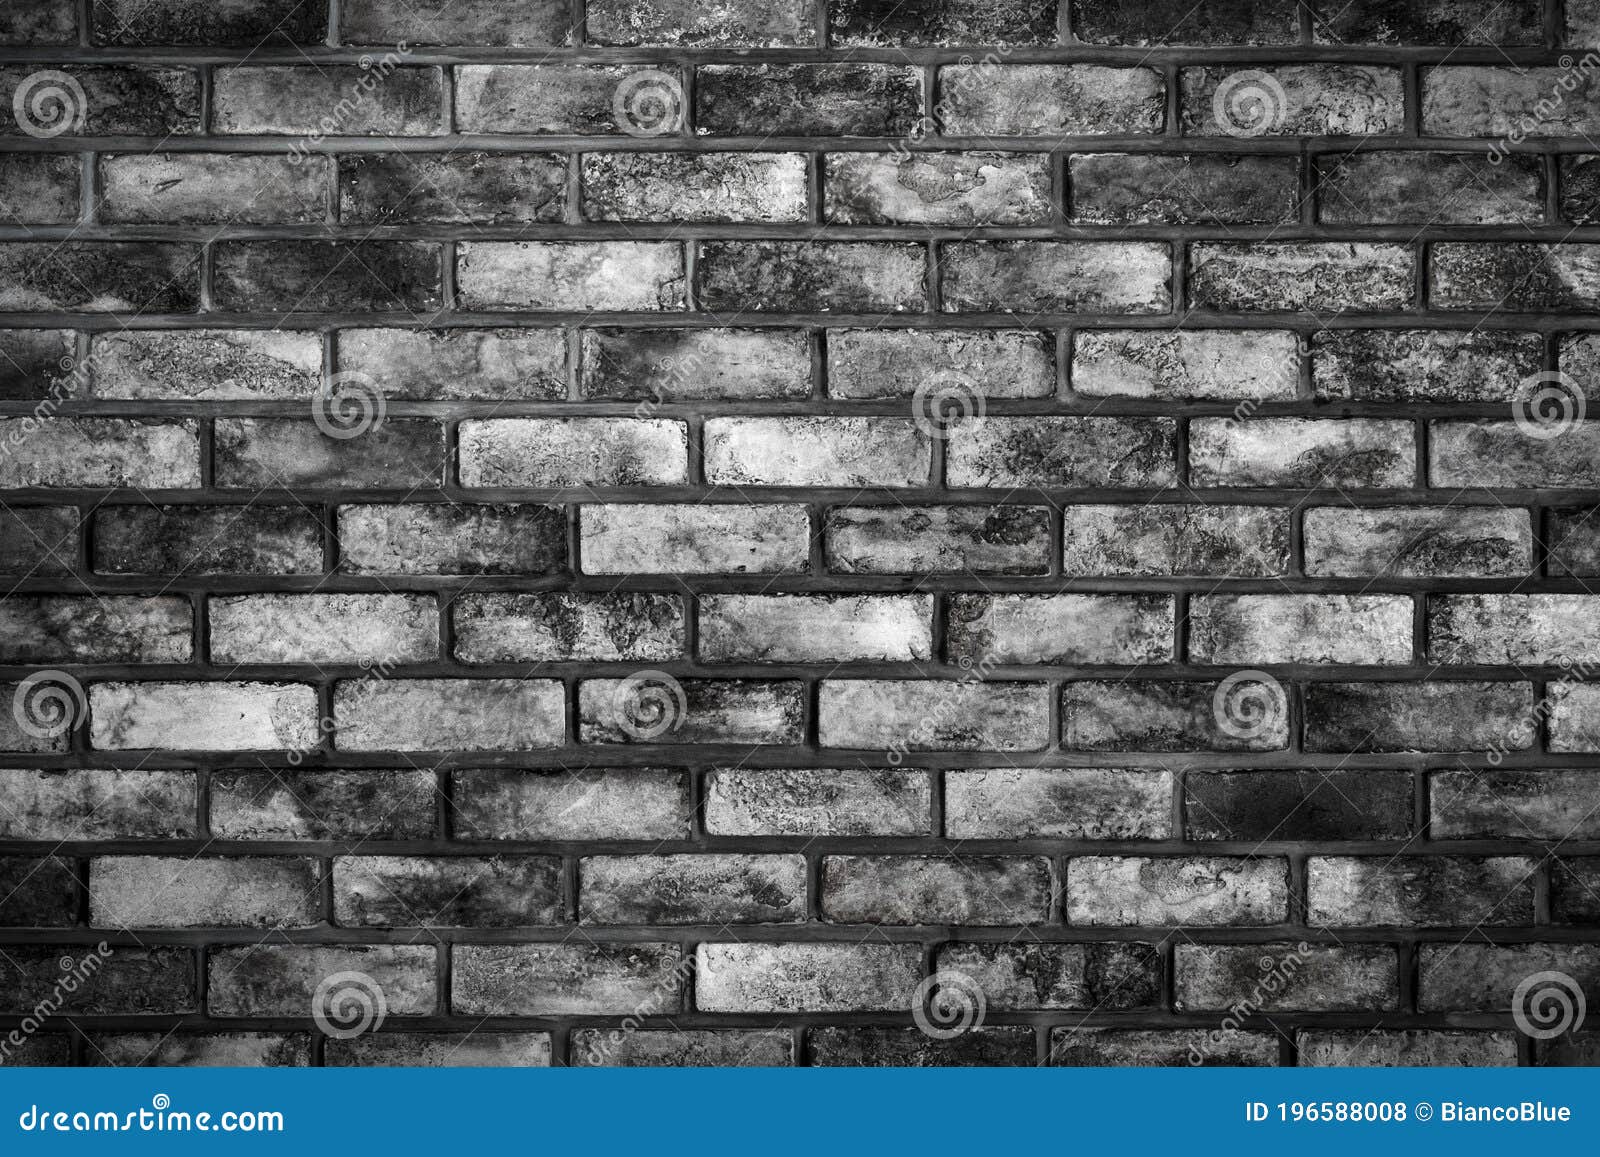 background of brick wall with old texture pattern.